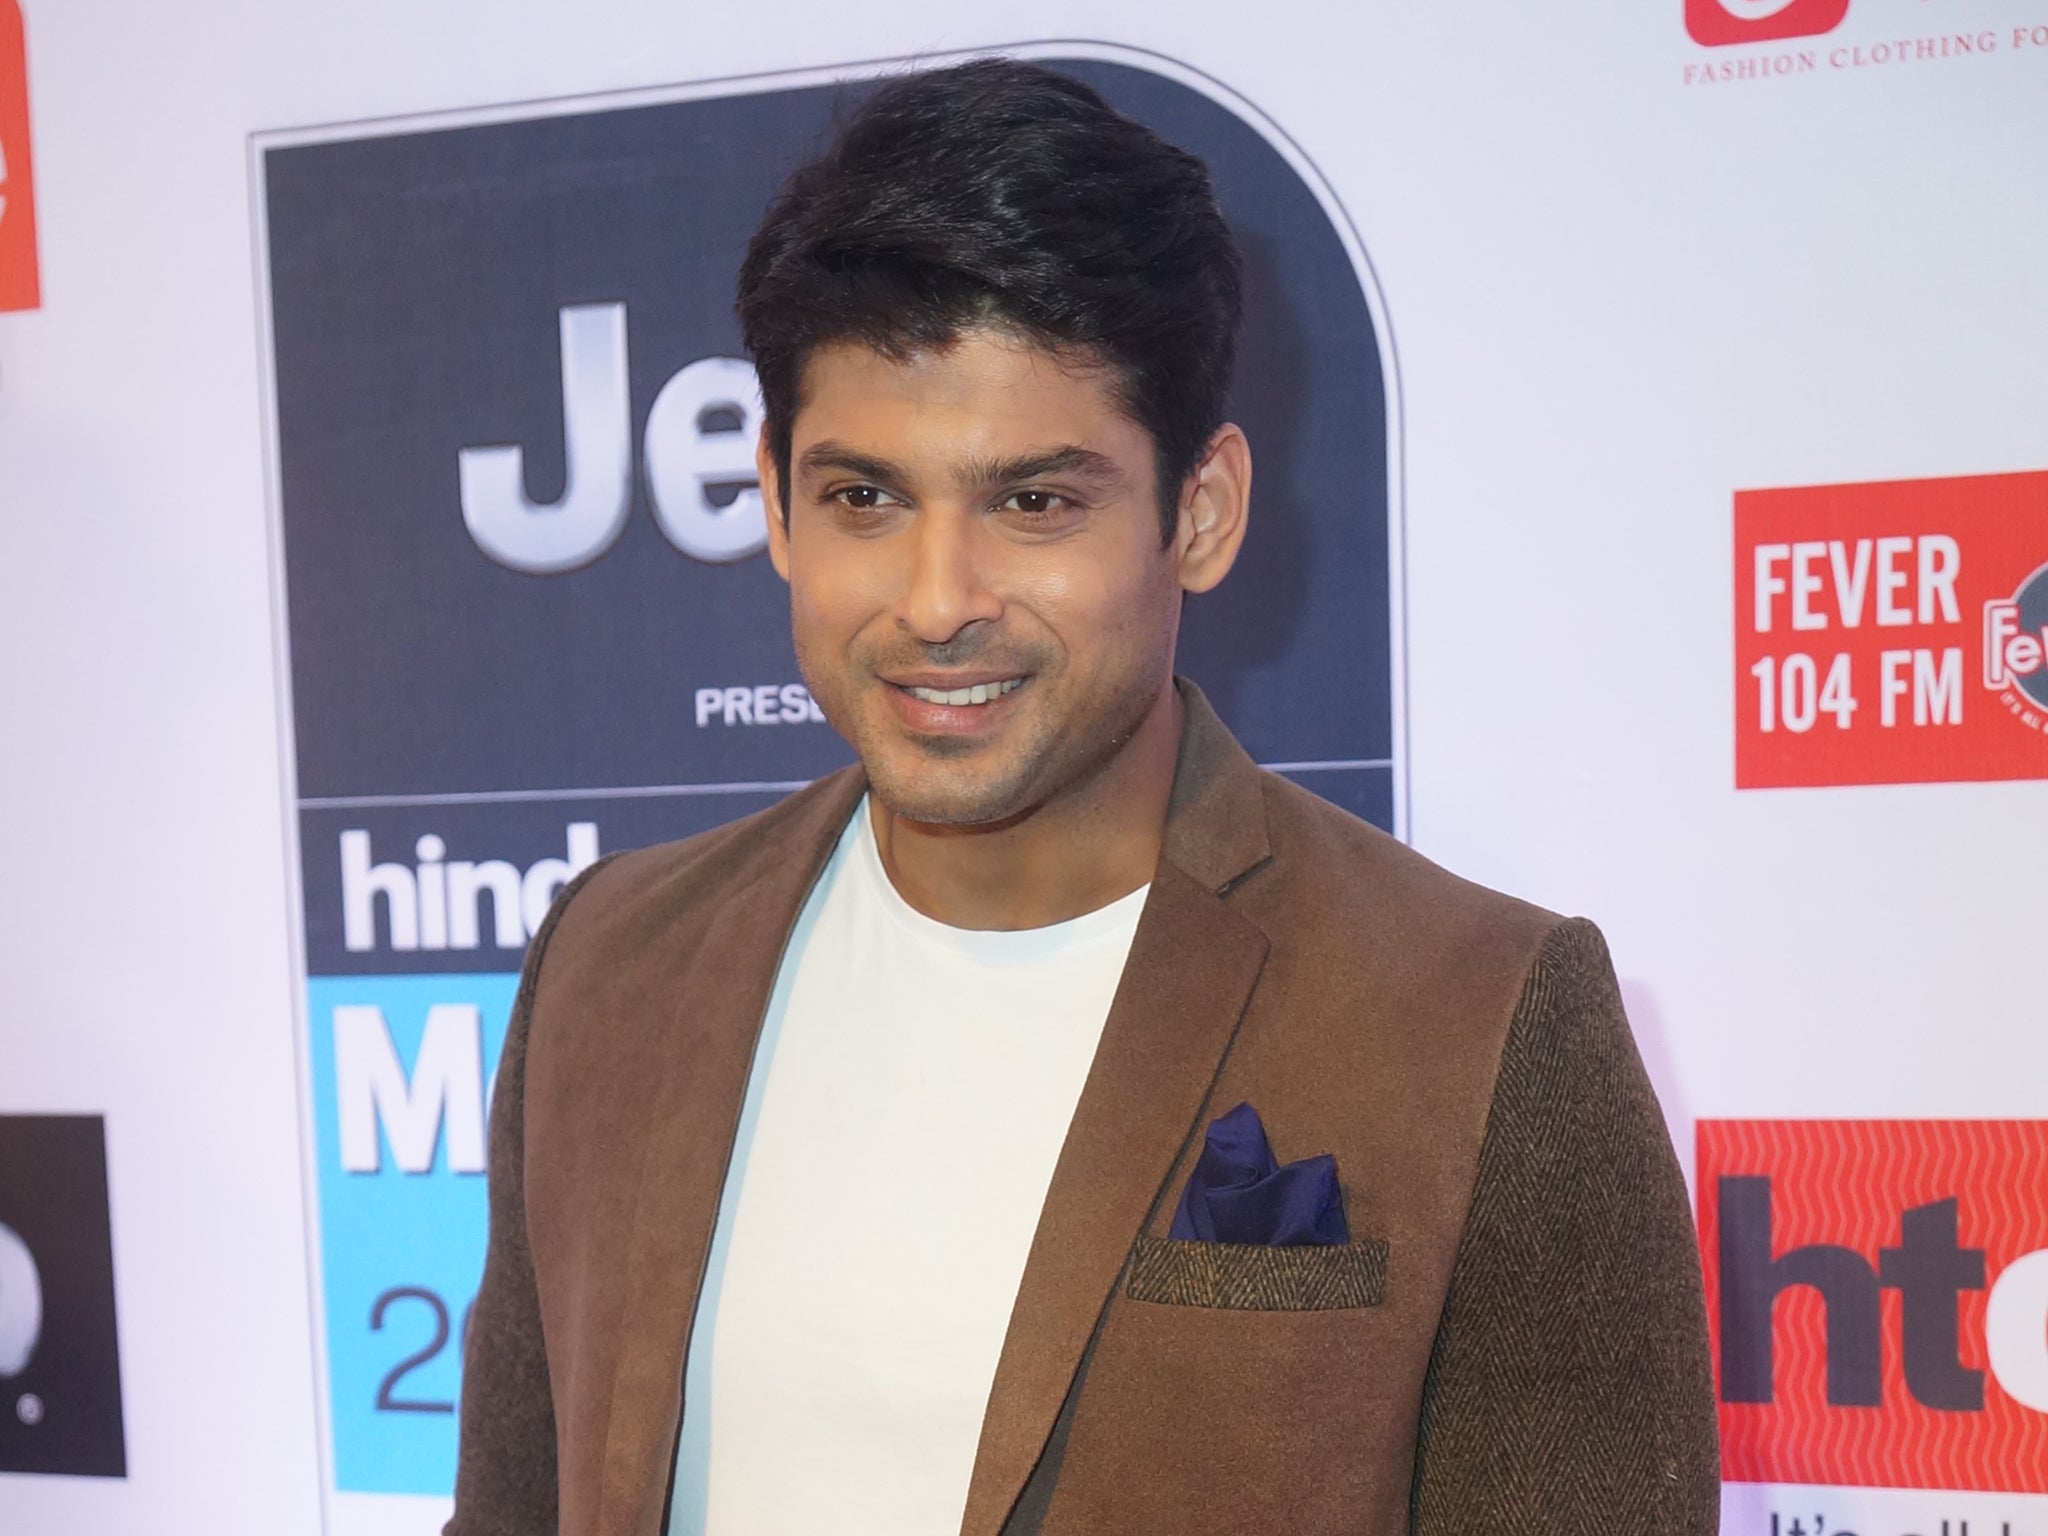 Sidharth Shukla has died of a heart attack aged 40